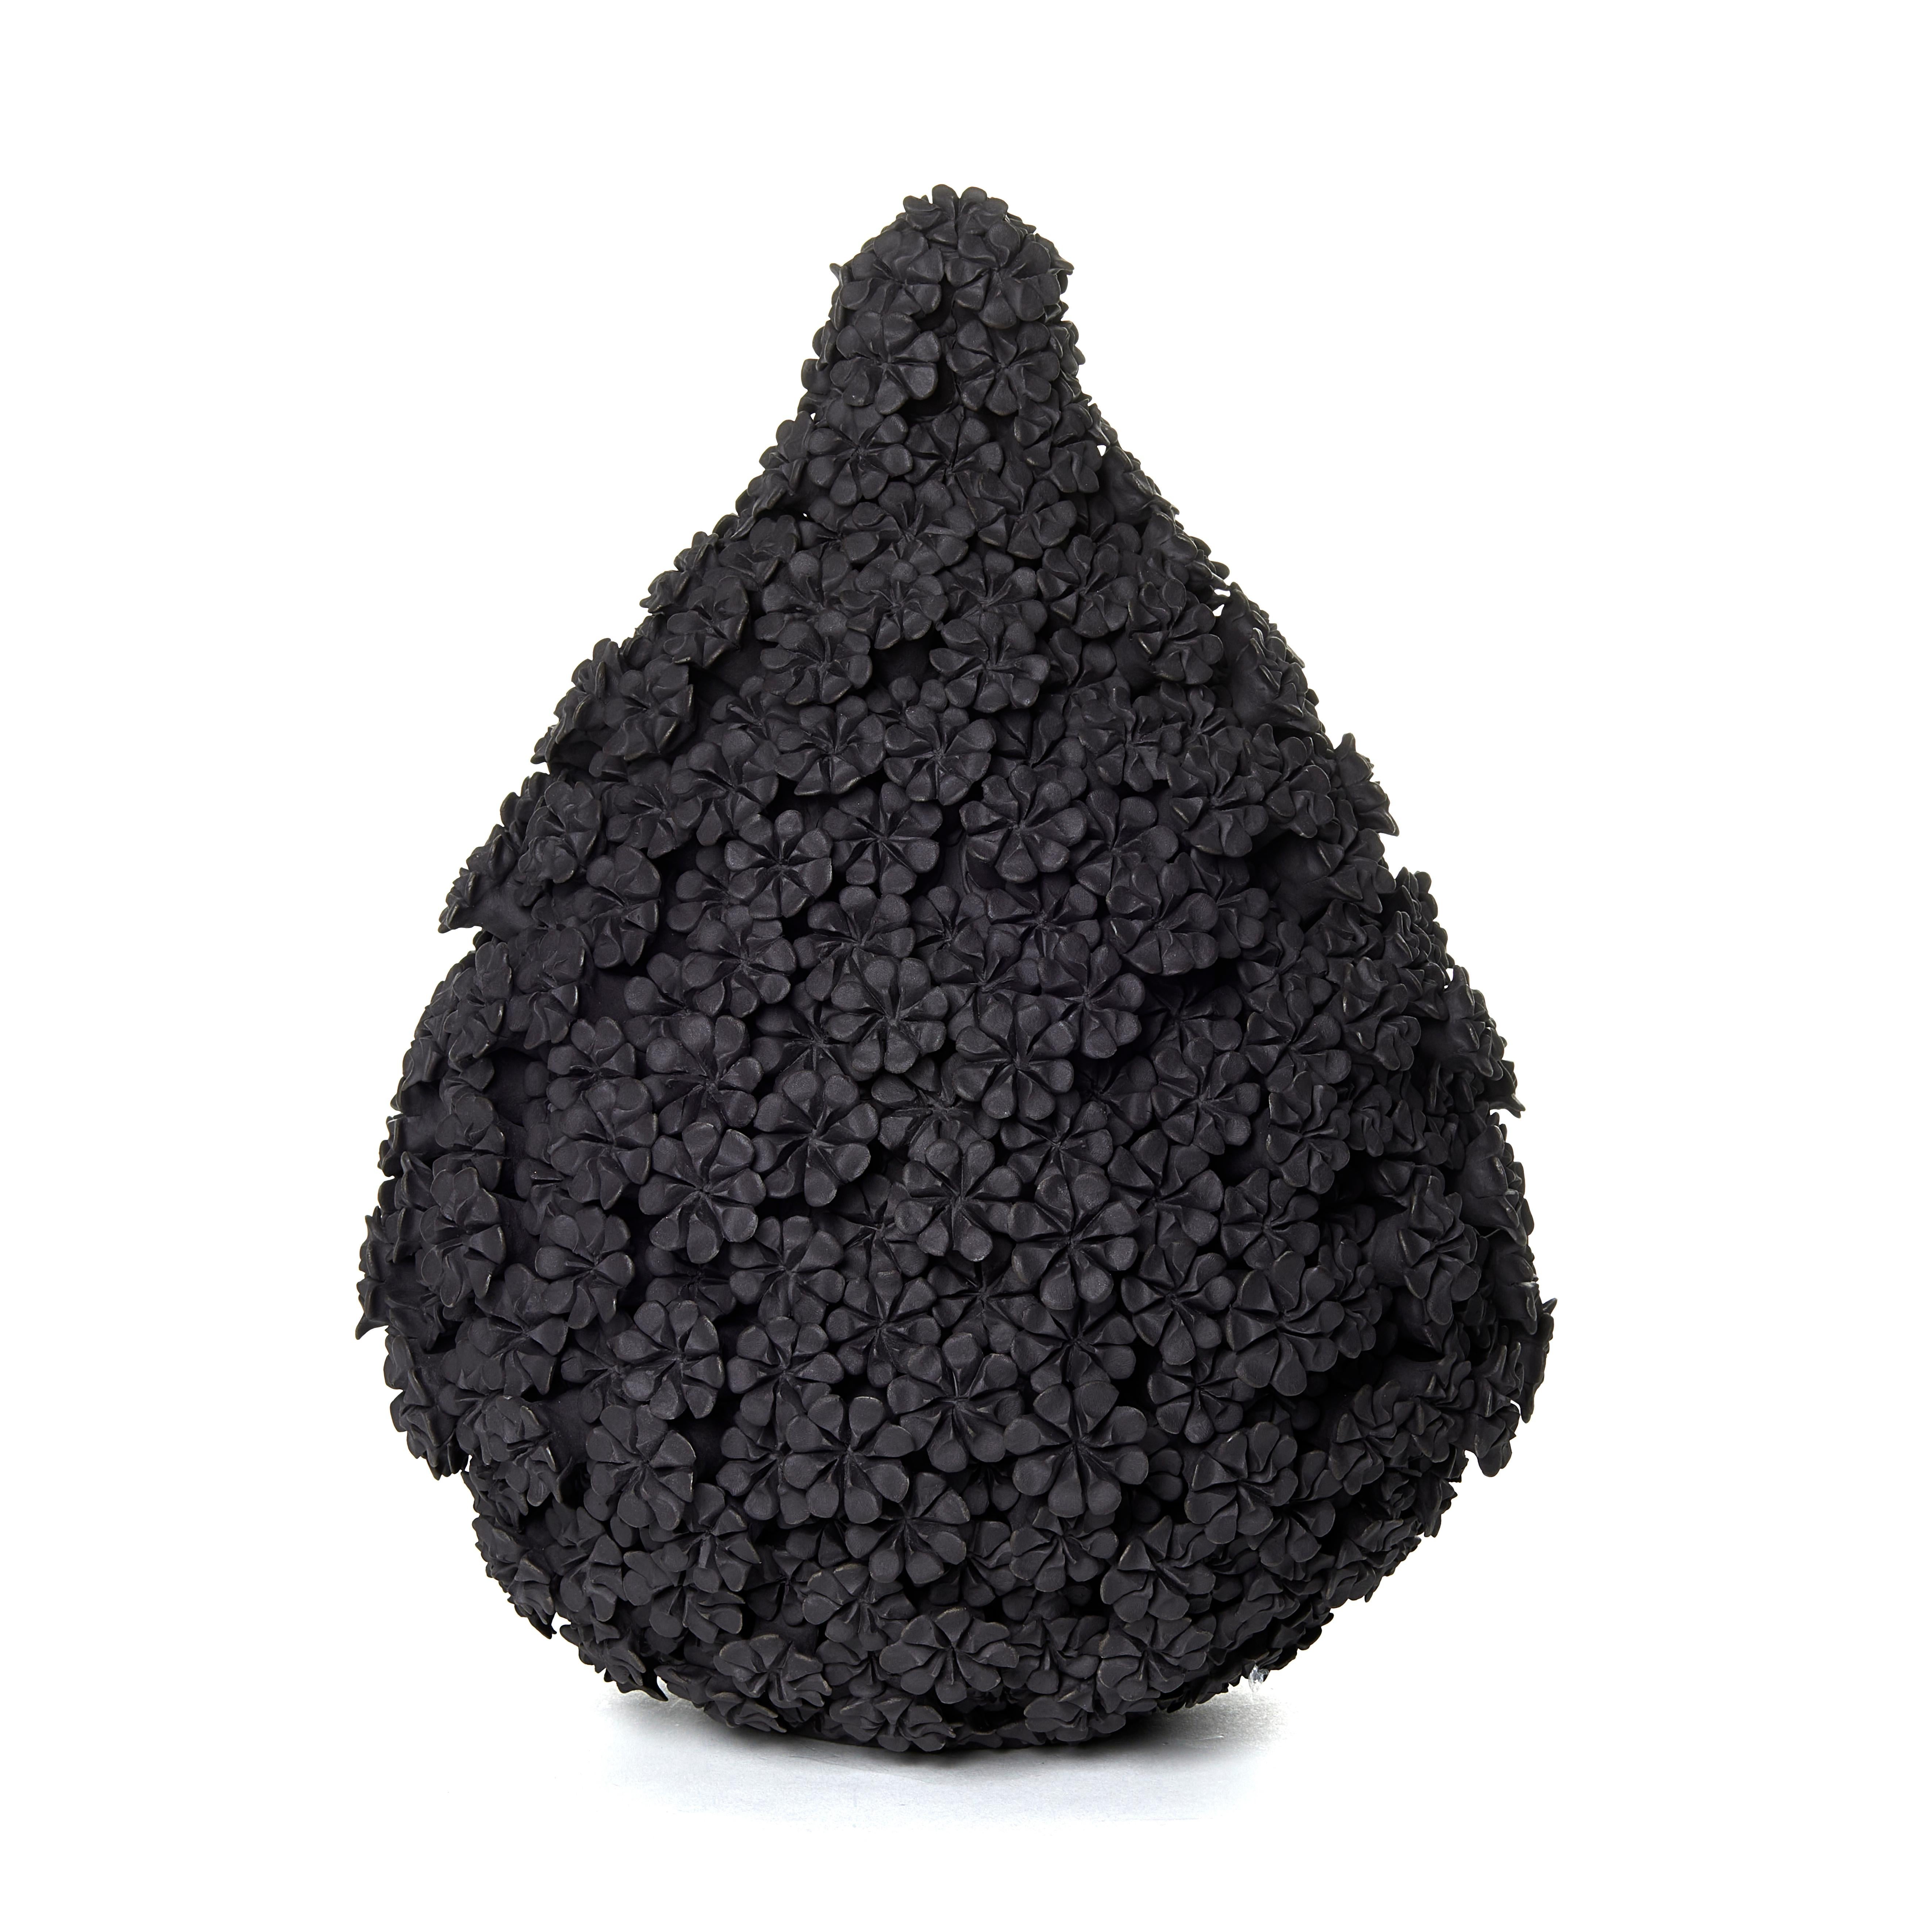 Daisy teardrop is a unique hand-sculpted black stoneware sculpture completely covered in a multitude of individually handmade flowers by the British artist Vanessa Hogge.

Vanessa Hogge breathes life into her clay in the form of dahlias,